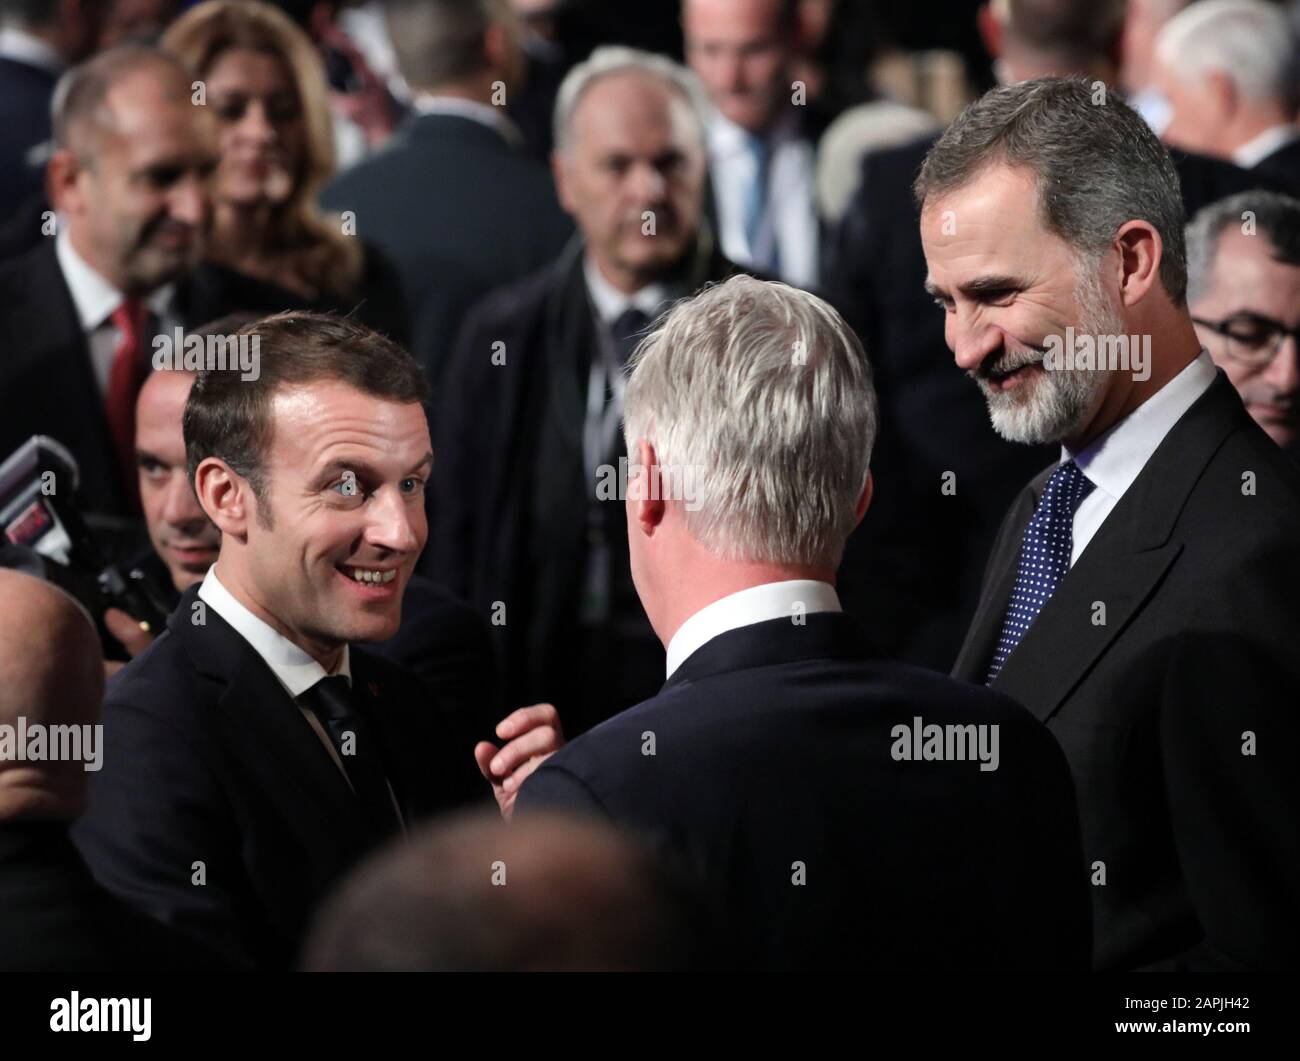 Jerusalem, Israel. 23rd Jan, 2020. French President Emmanuel Macron (L) with King Phillipe of Belgium (C) and King Felipe of Spain (R) speak during the Fifth World Holocaust Forum at the Yad Vashem Holocaust memorial museum in Jerusalem on Thursday, January 23, 2020. The event marking the 75th anniversary of the liberation of Auschwitz under the title 'Remembering the Holocaust: Fighting Antisemitism' is held to preserve the memory of the Holocaust atrocities by Nazi Germany during World War II. Pool Photo by Abir Sultan/UPI Credit: UPI/Alamy Live News Stock Photo